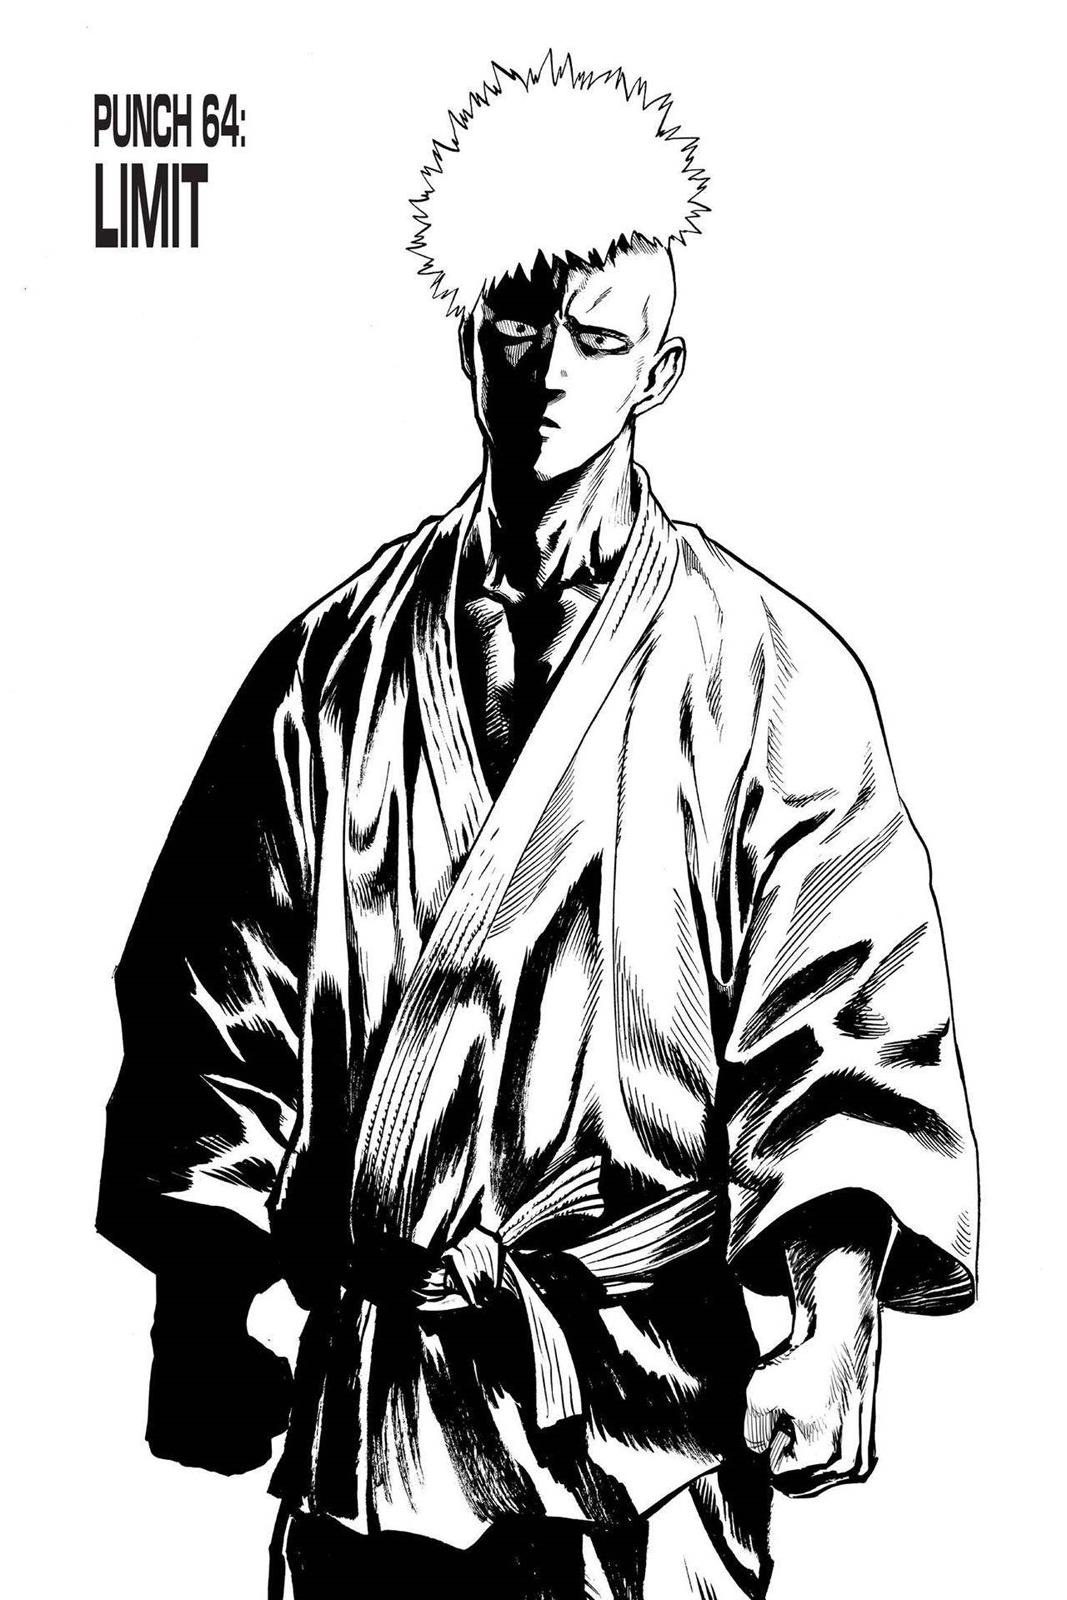 One-Punch Man, Punch 64 image 01